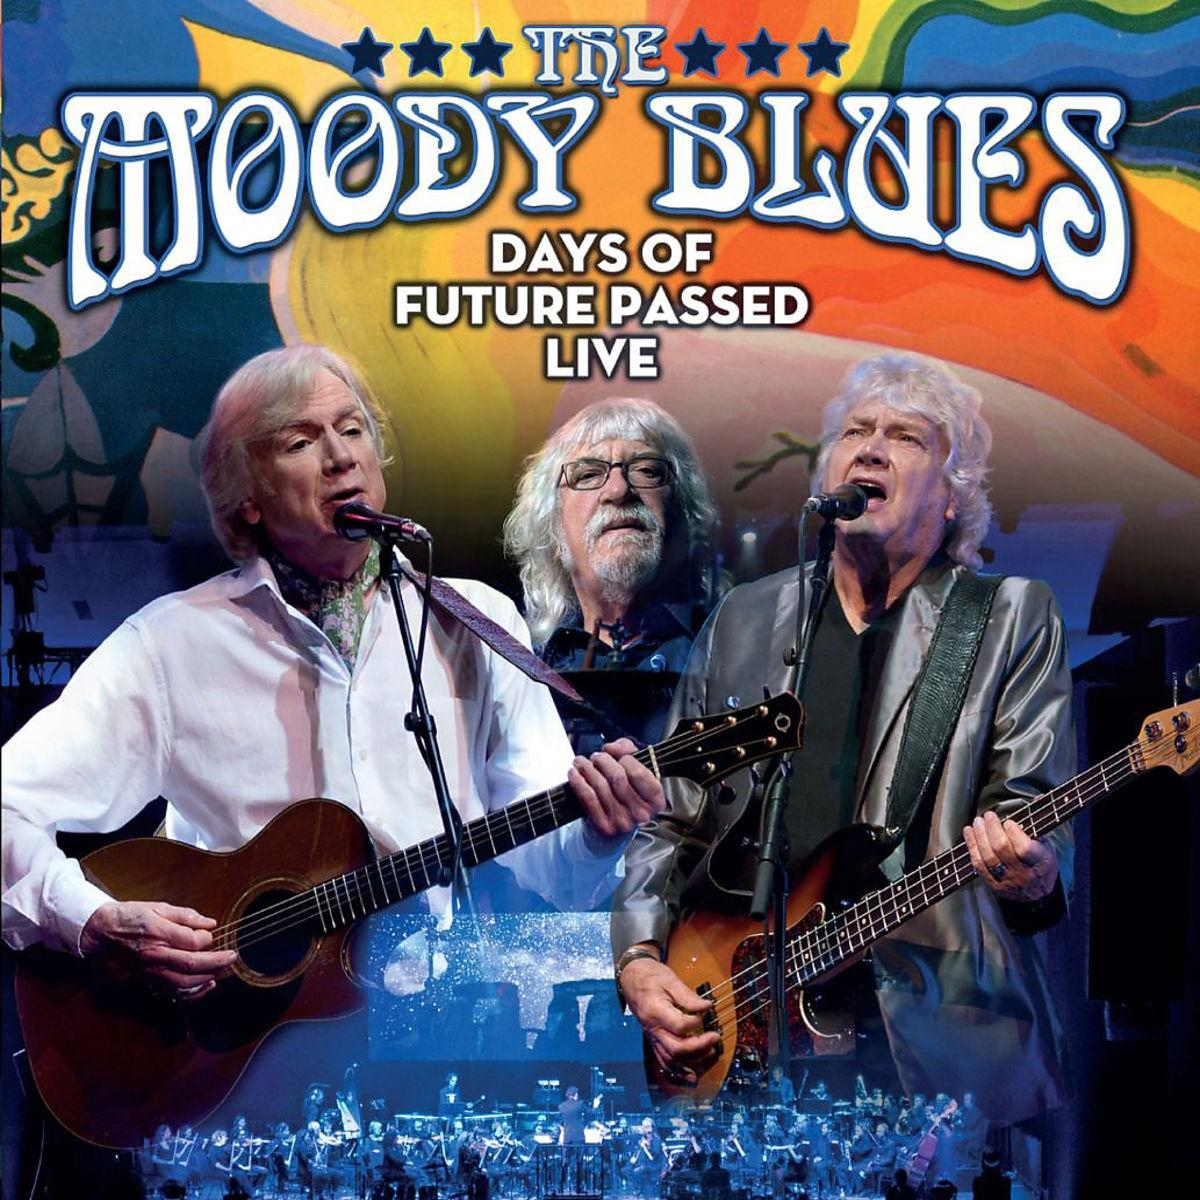 The Moody - Days (Blu-ray) - 2017) Toronto (Live Of Future In Passed Blues